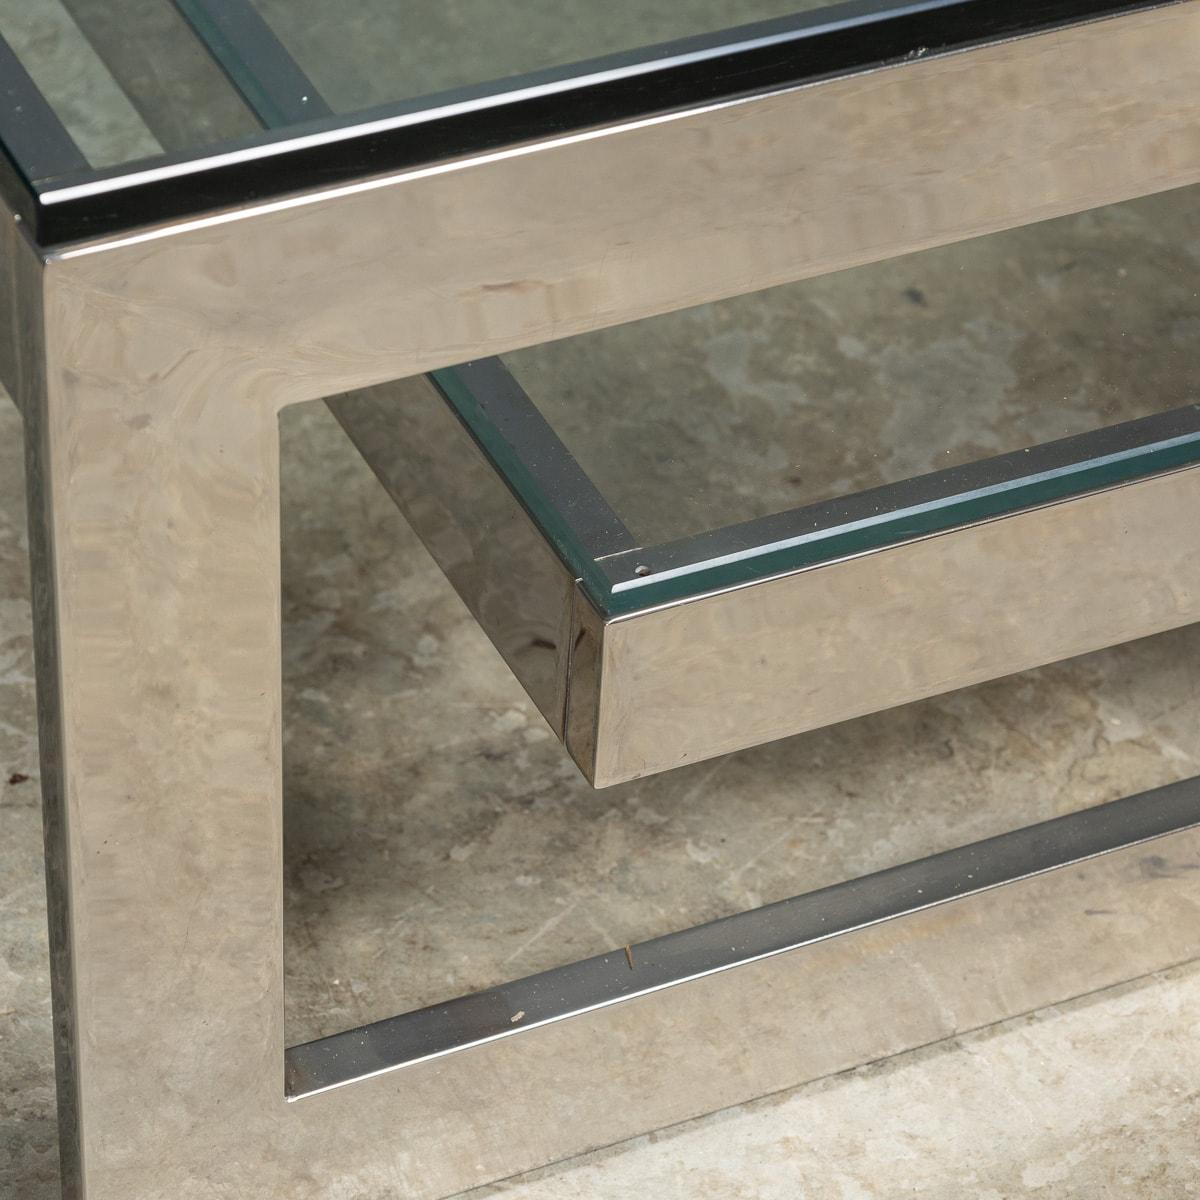 20th Century Polished Metal & Glass Coffee Table By Belgo Chrome, Belgium c.1970 For Sale 6